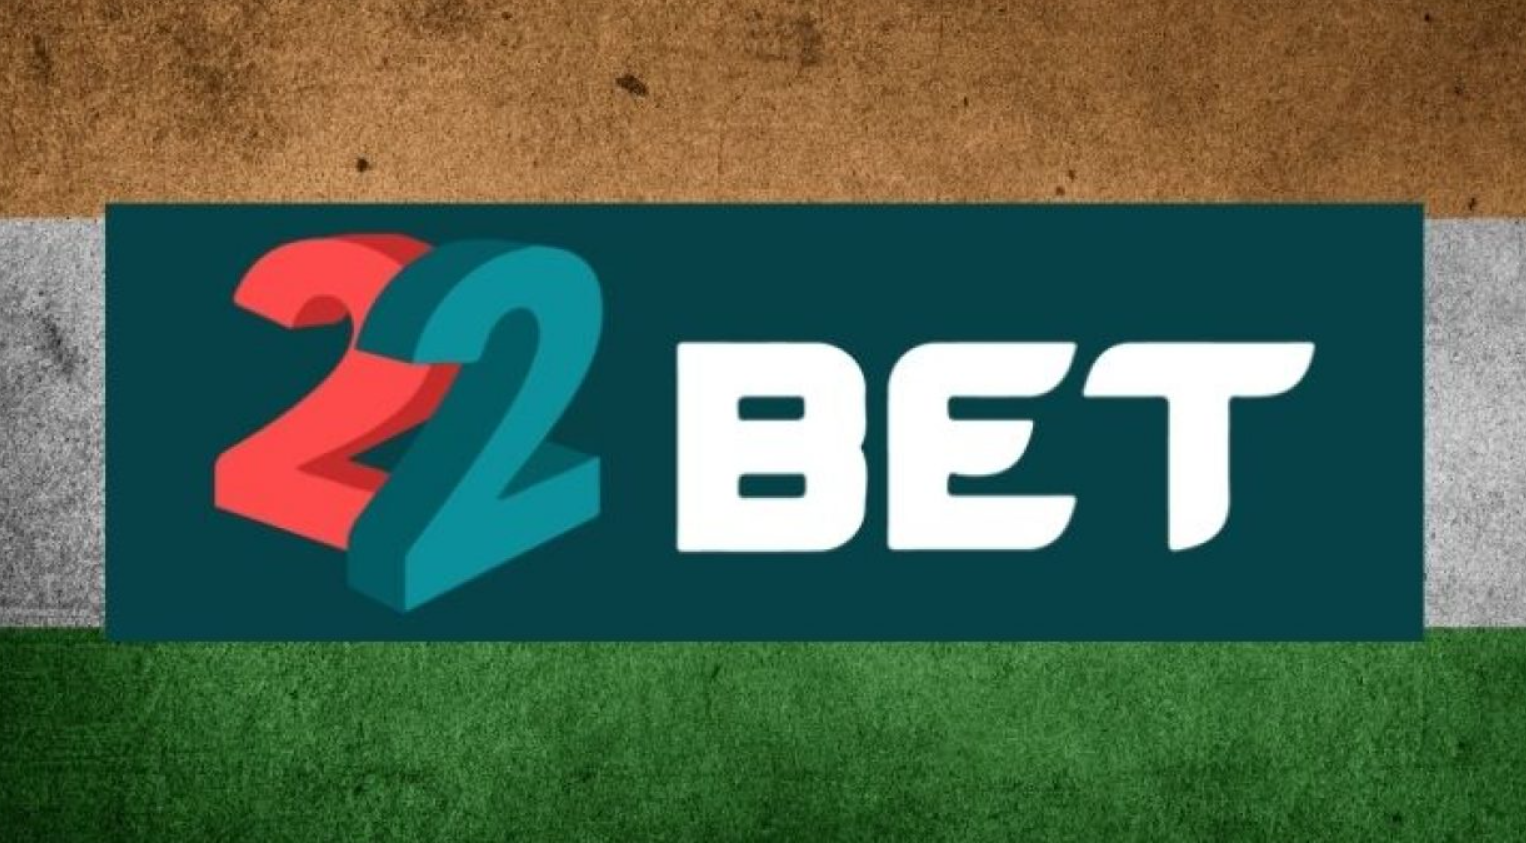 Brief review of the promo campaign by 22Bet